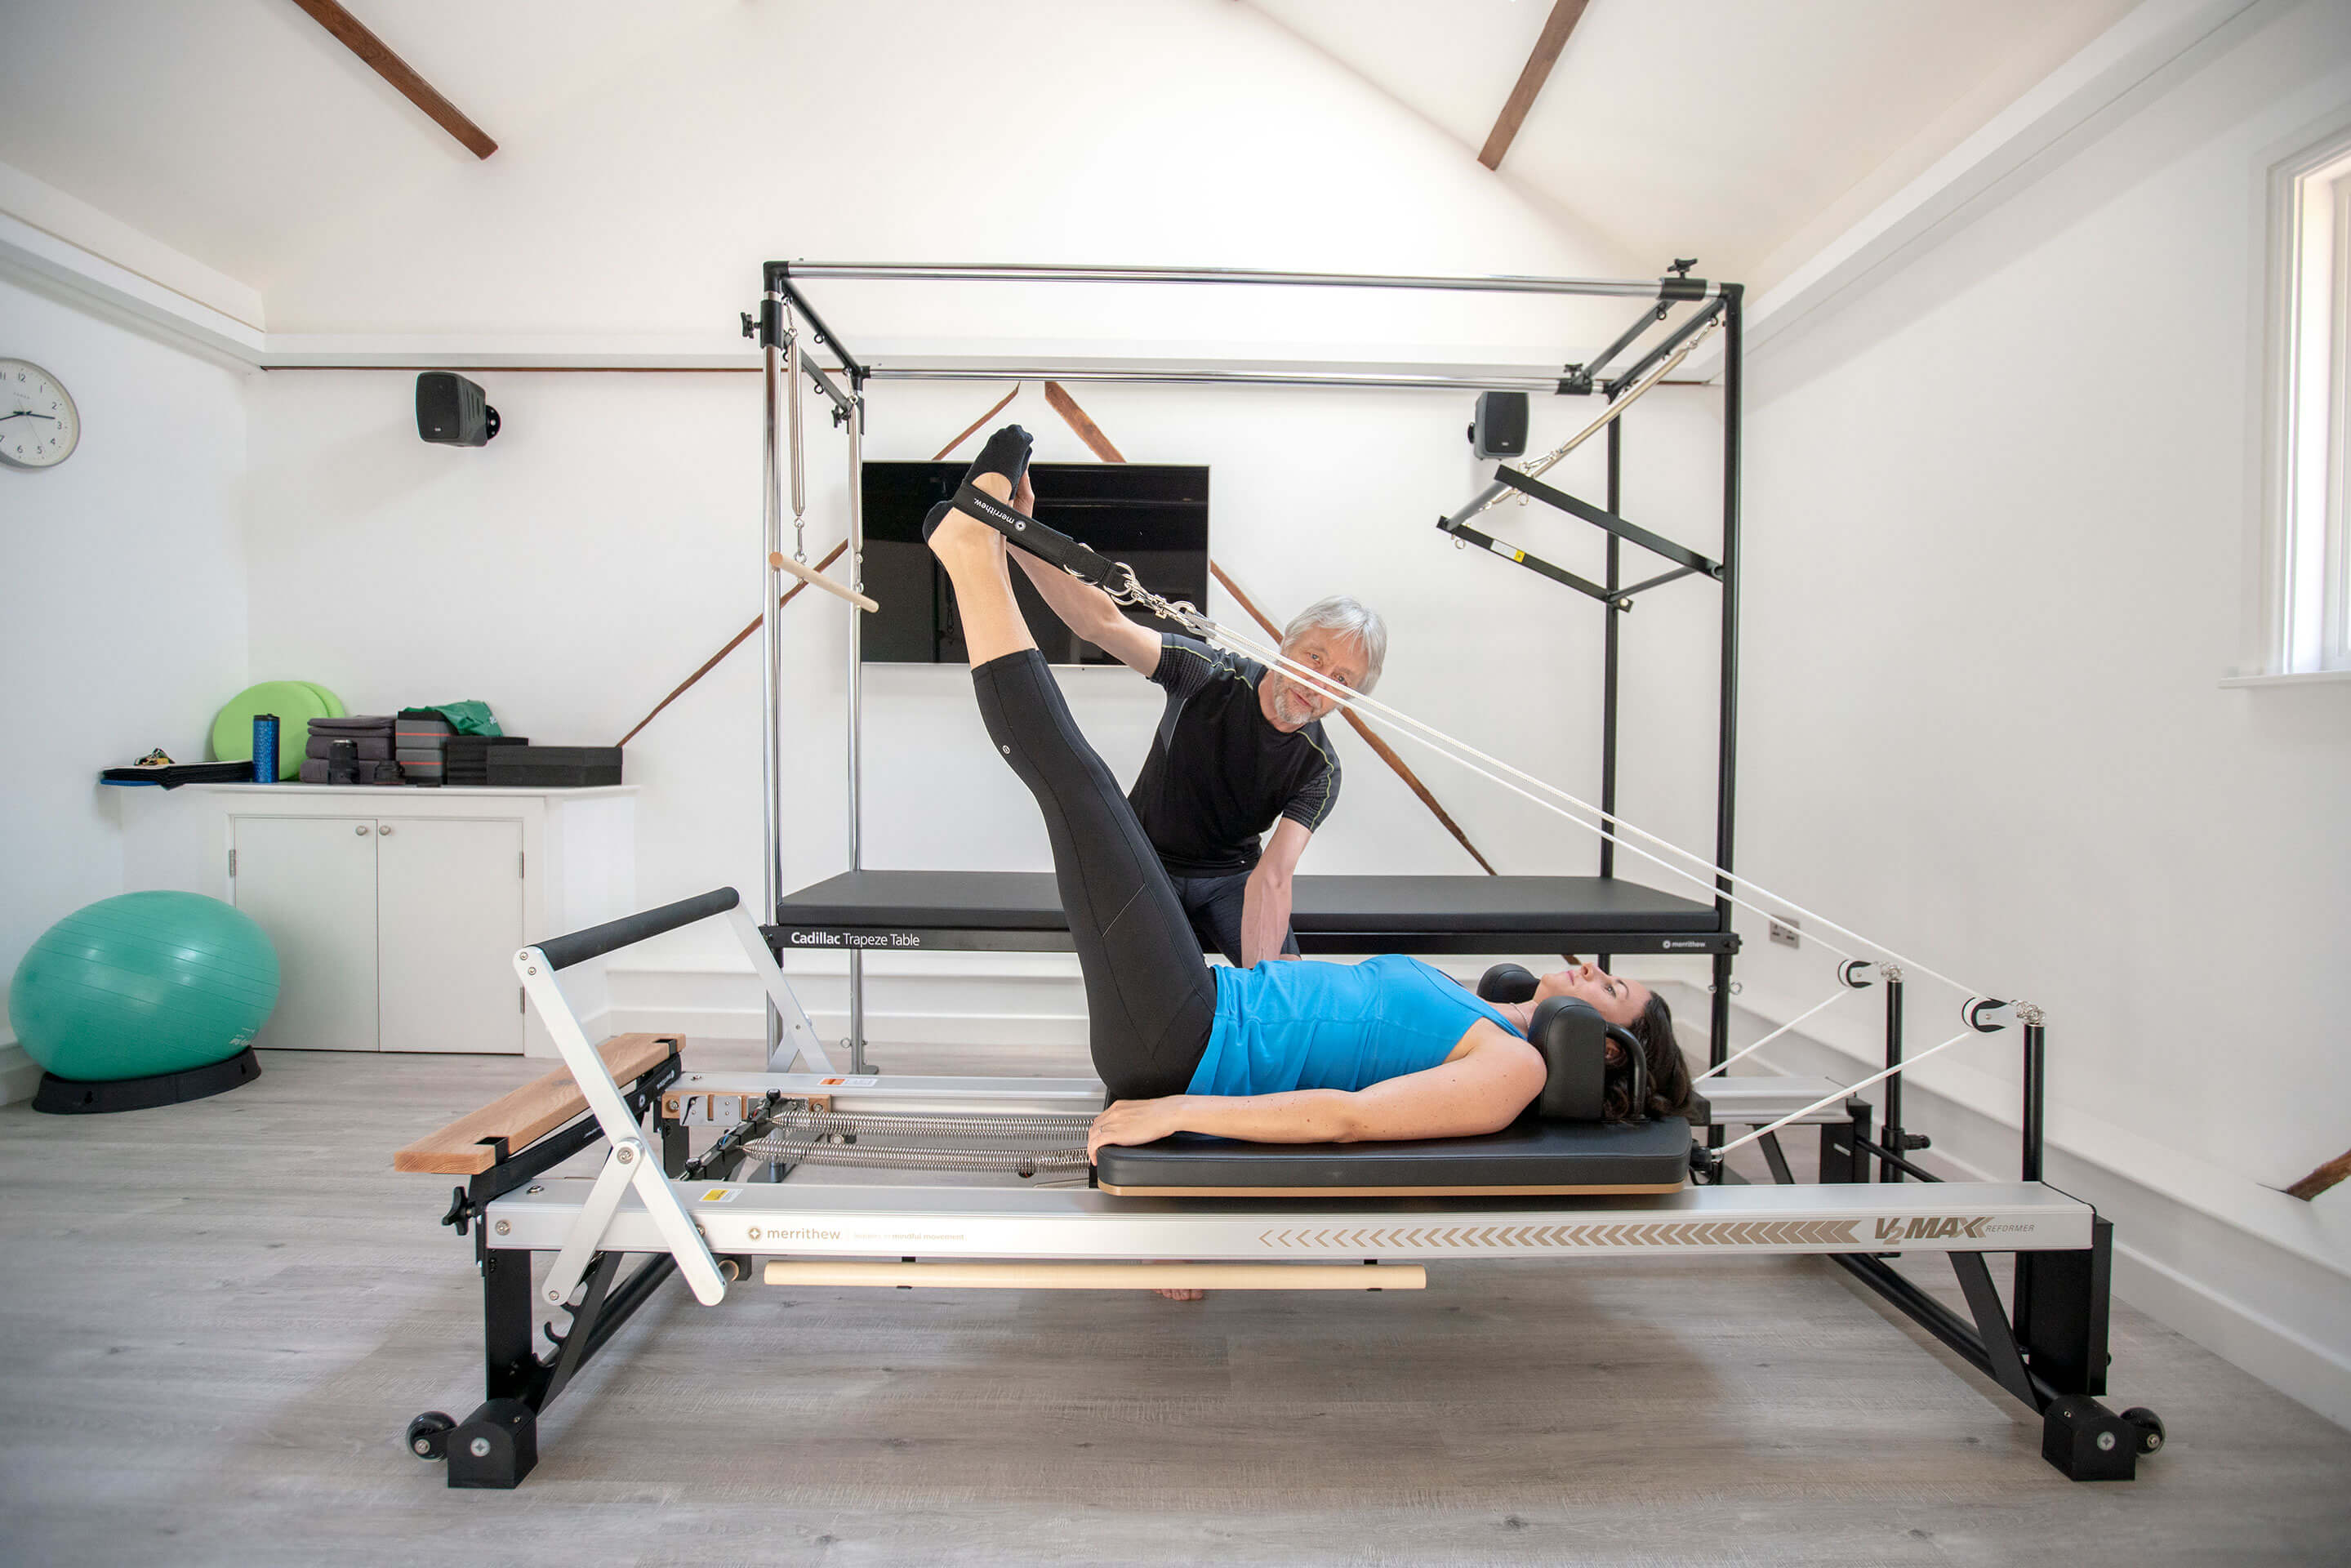 At The Form Practice we have a fully kitted out Piiates studio including Reformer, Cadillac, Chair and Ladder Barrel